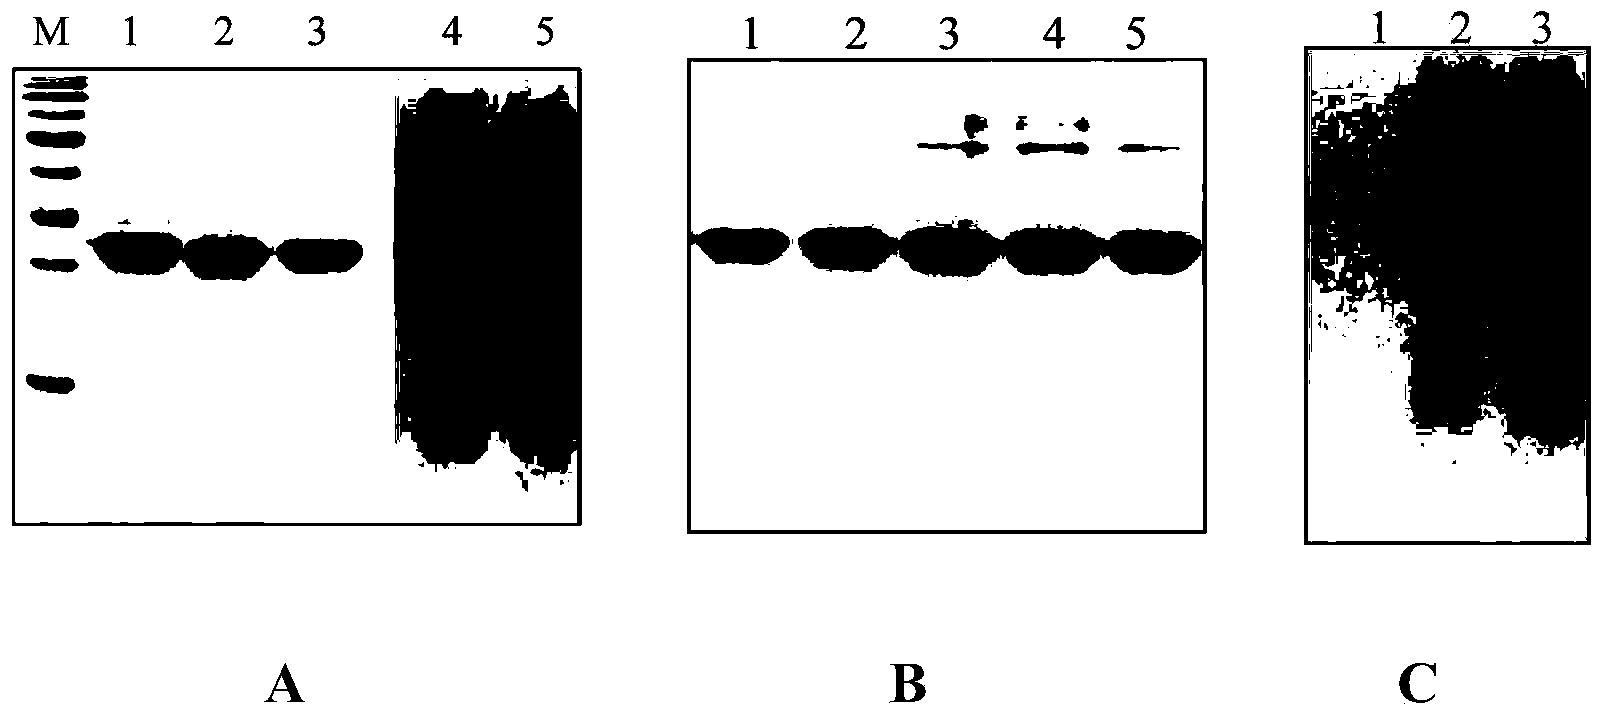 Method for dissolving inclusion body proteins